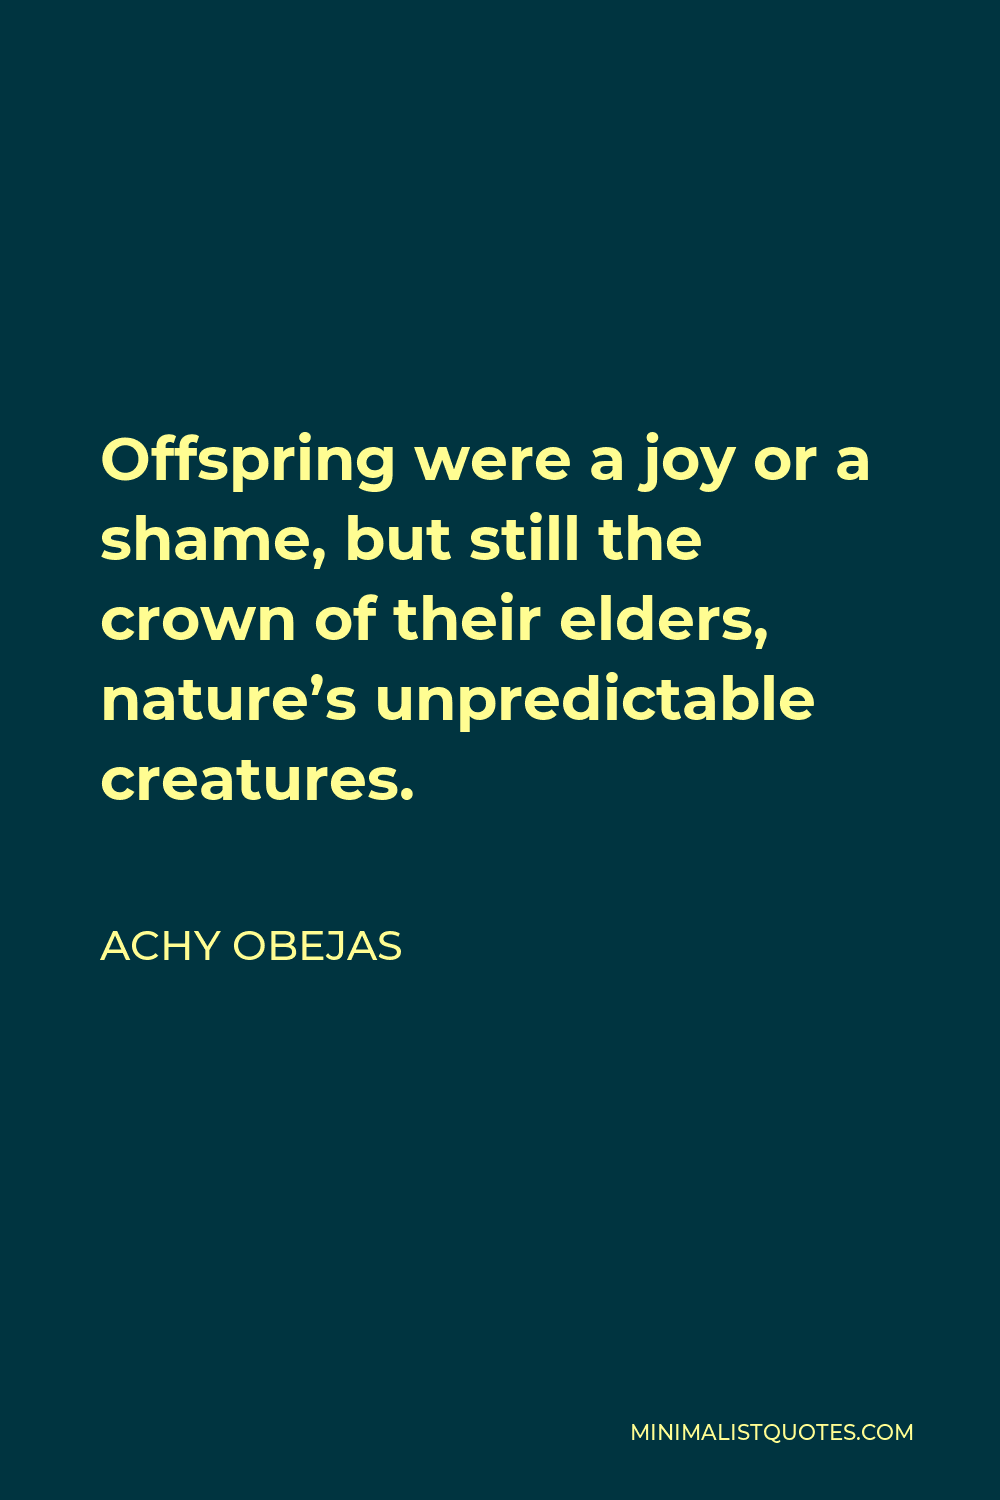 Achy Obejas Quote - Offspring were a joy or a shame, but still the crown of their elders, nature’s unpredictable creatures.